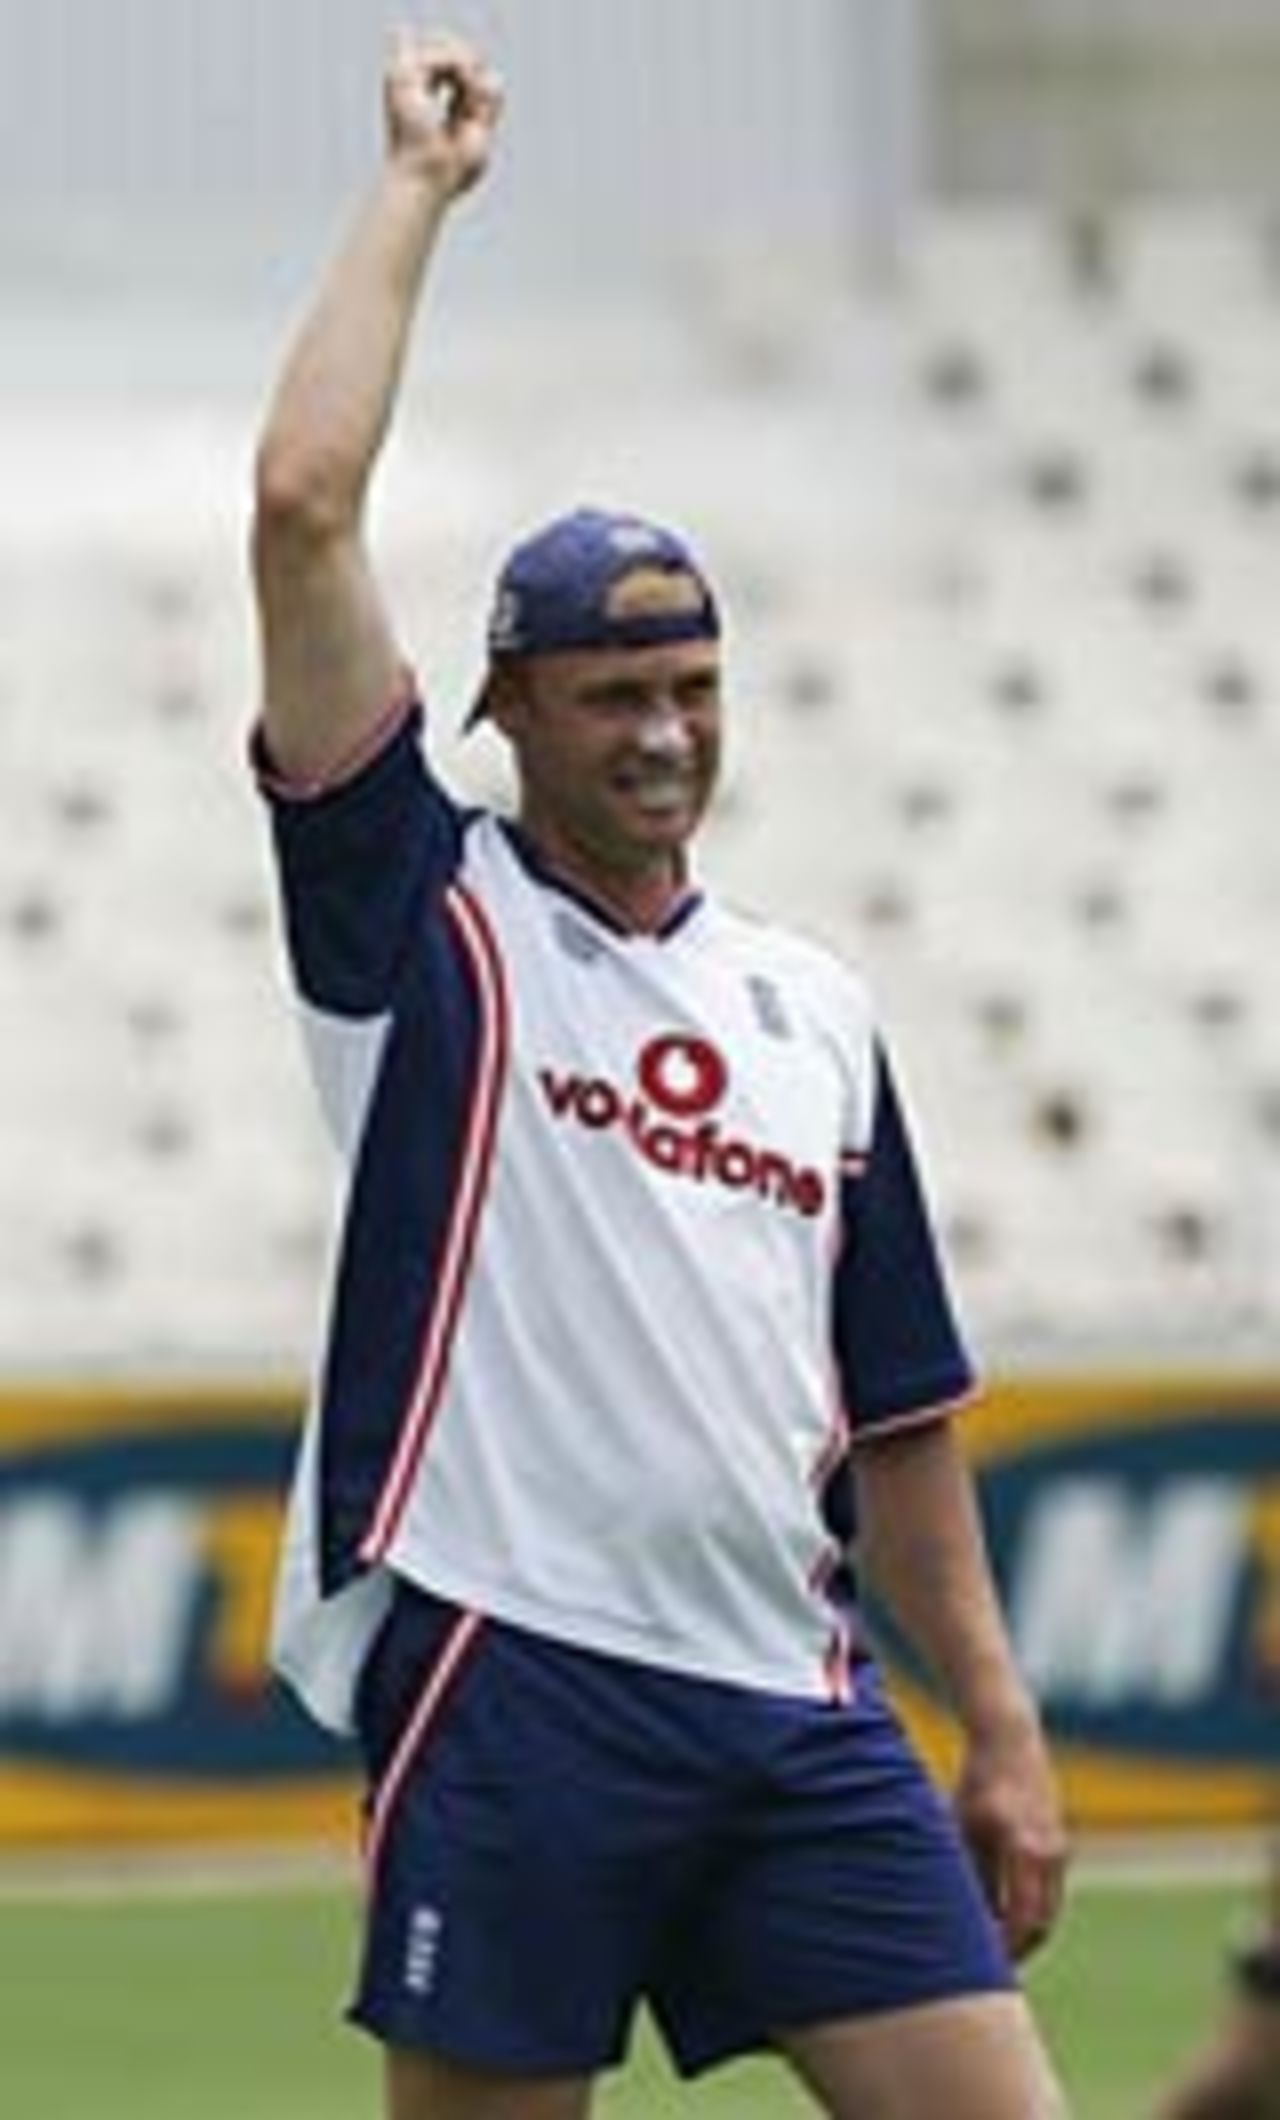 Andrew Flintoff points to show it's his turn to bowl in the nets at the Wanderers, January 12, 2005